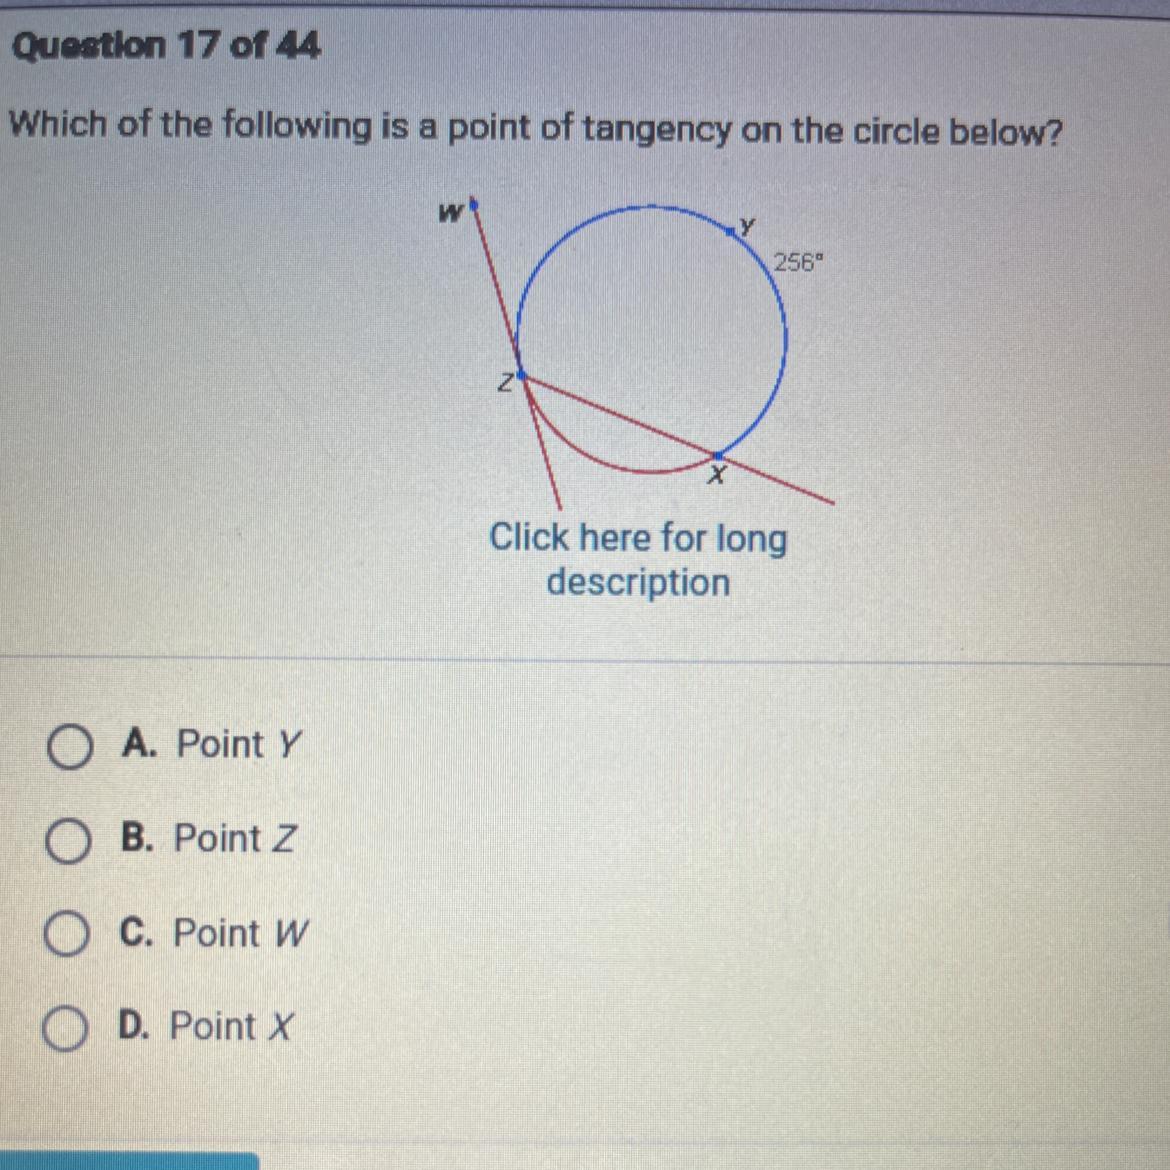 Which Of The Following Is A Point Of Tangency On The Circle Below?A. Point YB. Point ZC. Point WD. Point